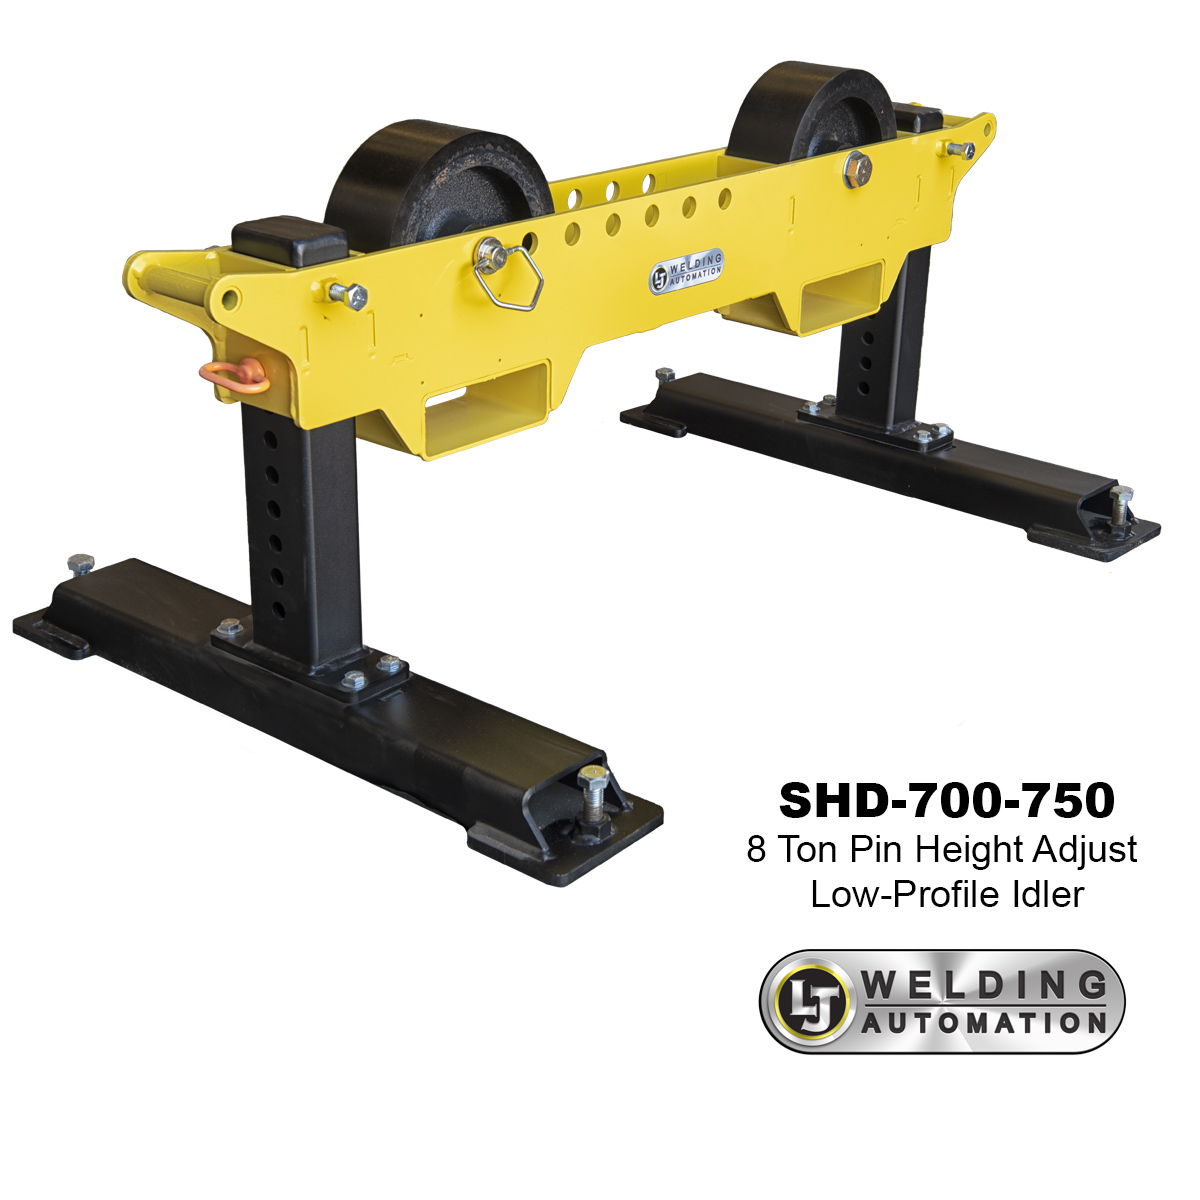 03-8-Ton-Geared-Height-Adjust-Low-Profile-Driver-Idler